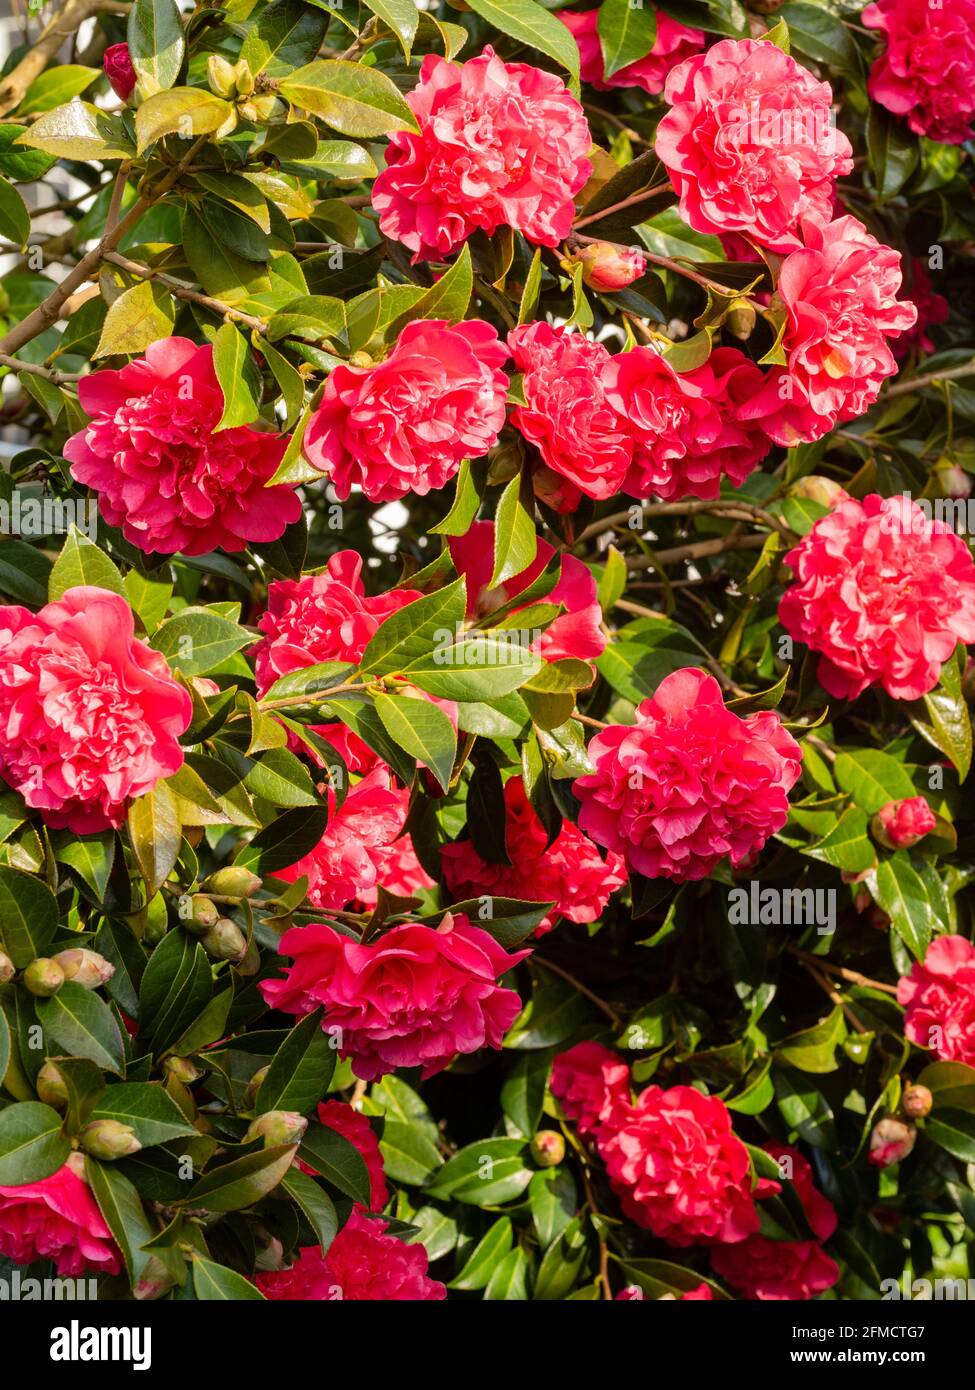 Massed red spring flowers of of the peony centred Camellia x williamsii 'Anticipation' Stock Photo